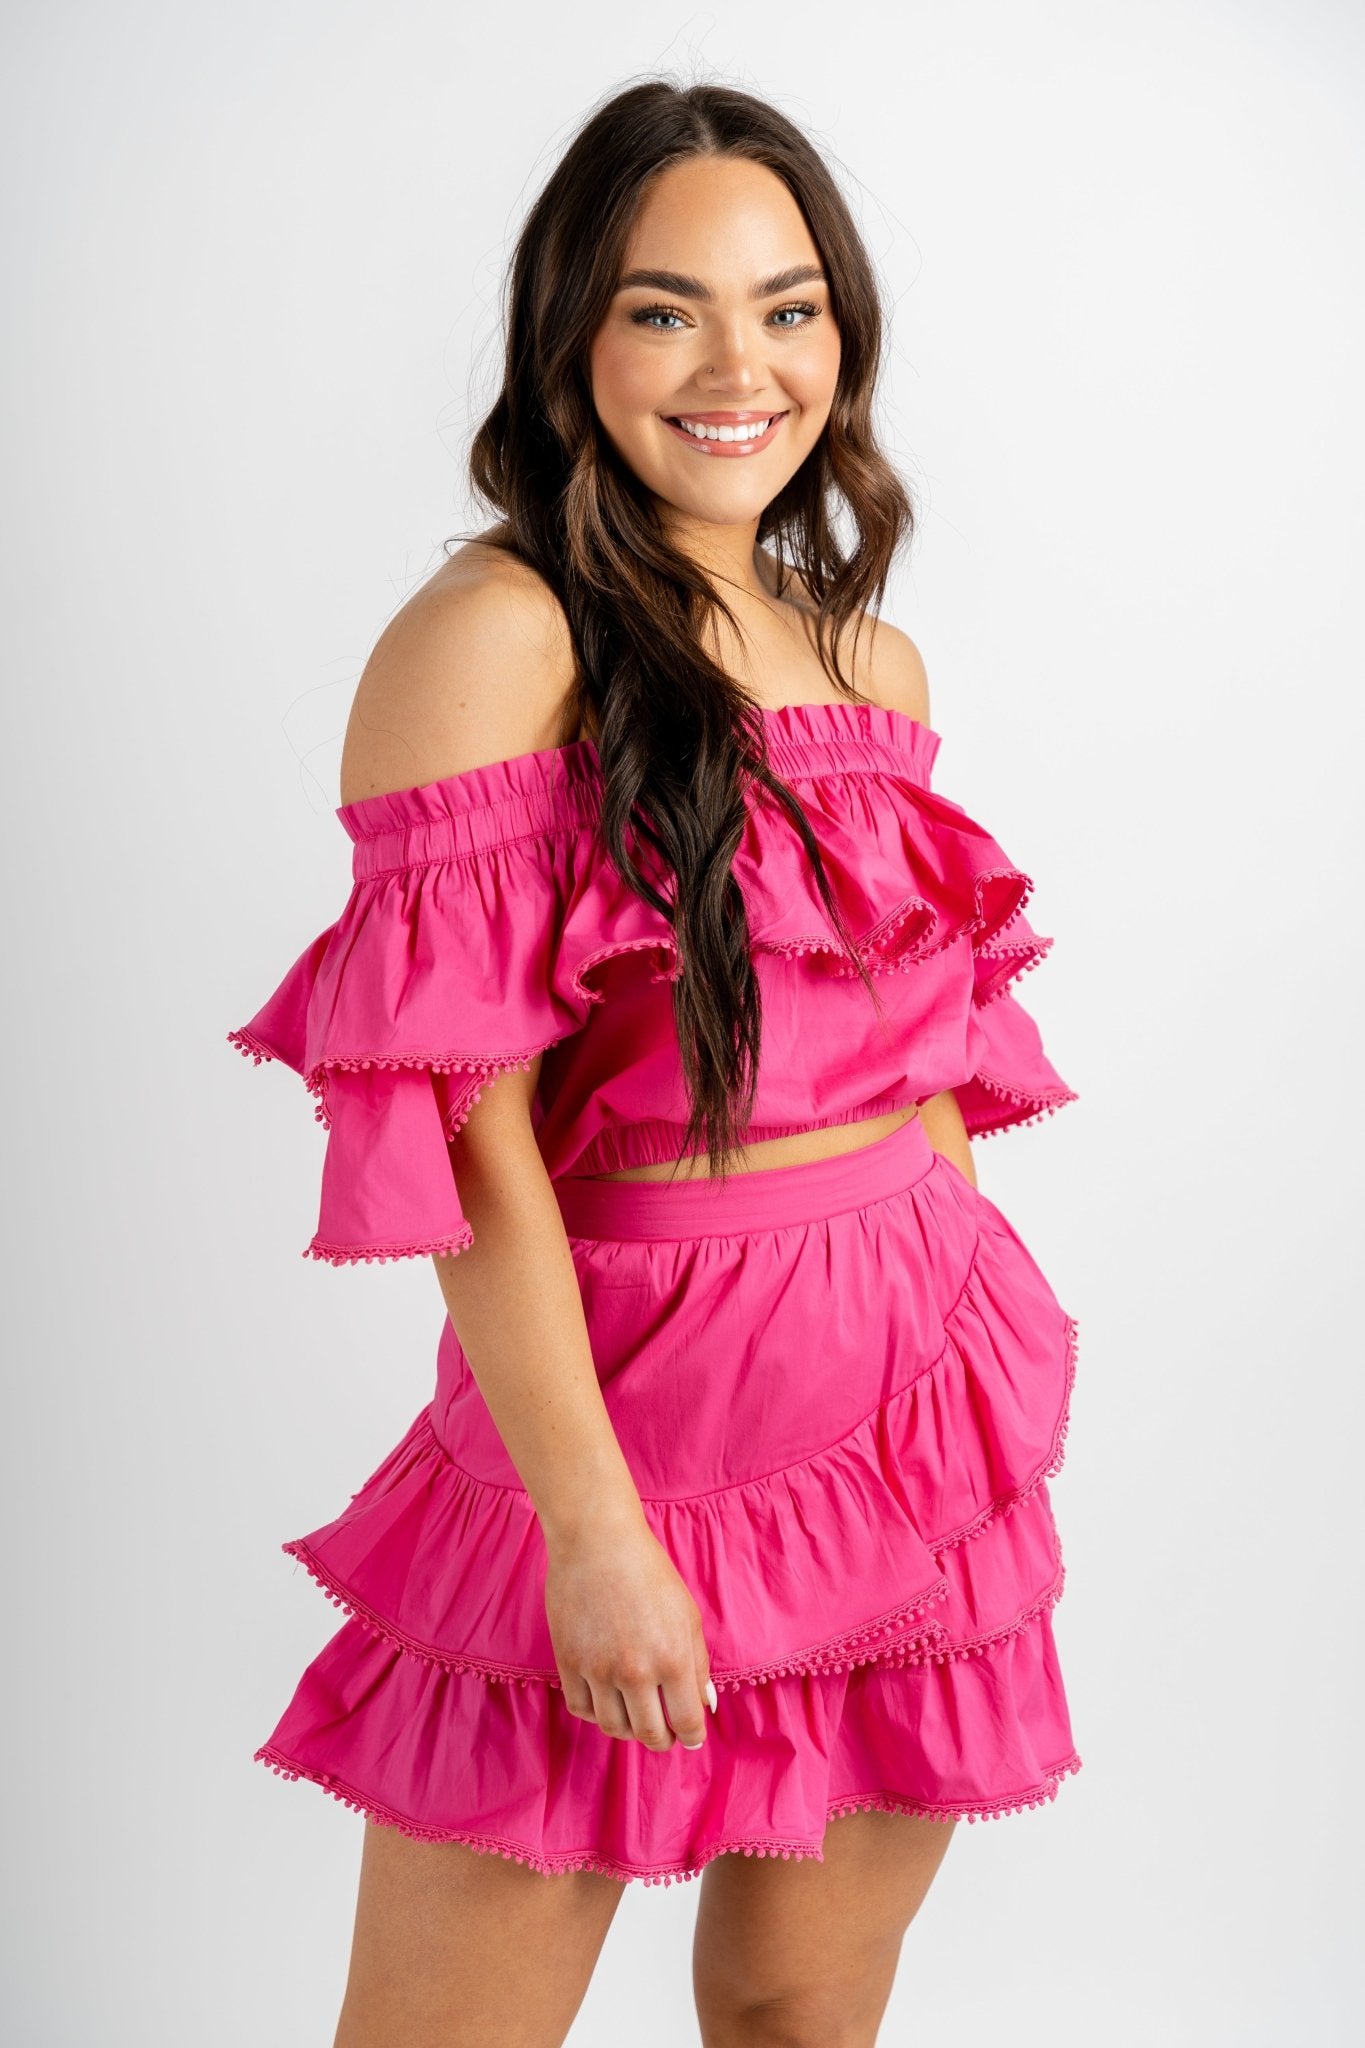 Off shoulder poplin ruffle top fuchsia - Adorable tops - Stylish Vacation T-Shirts at Lush Fashion Lounge Boutique in Oklahoma City